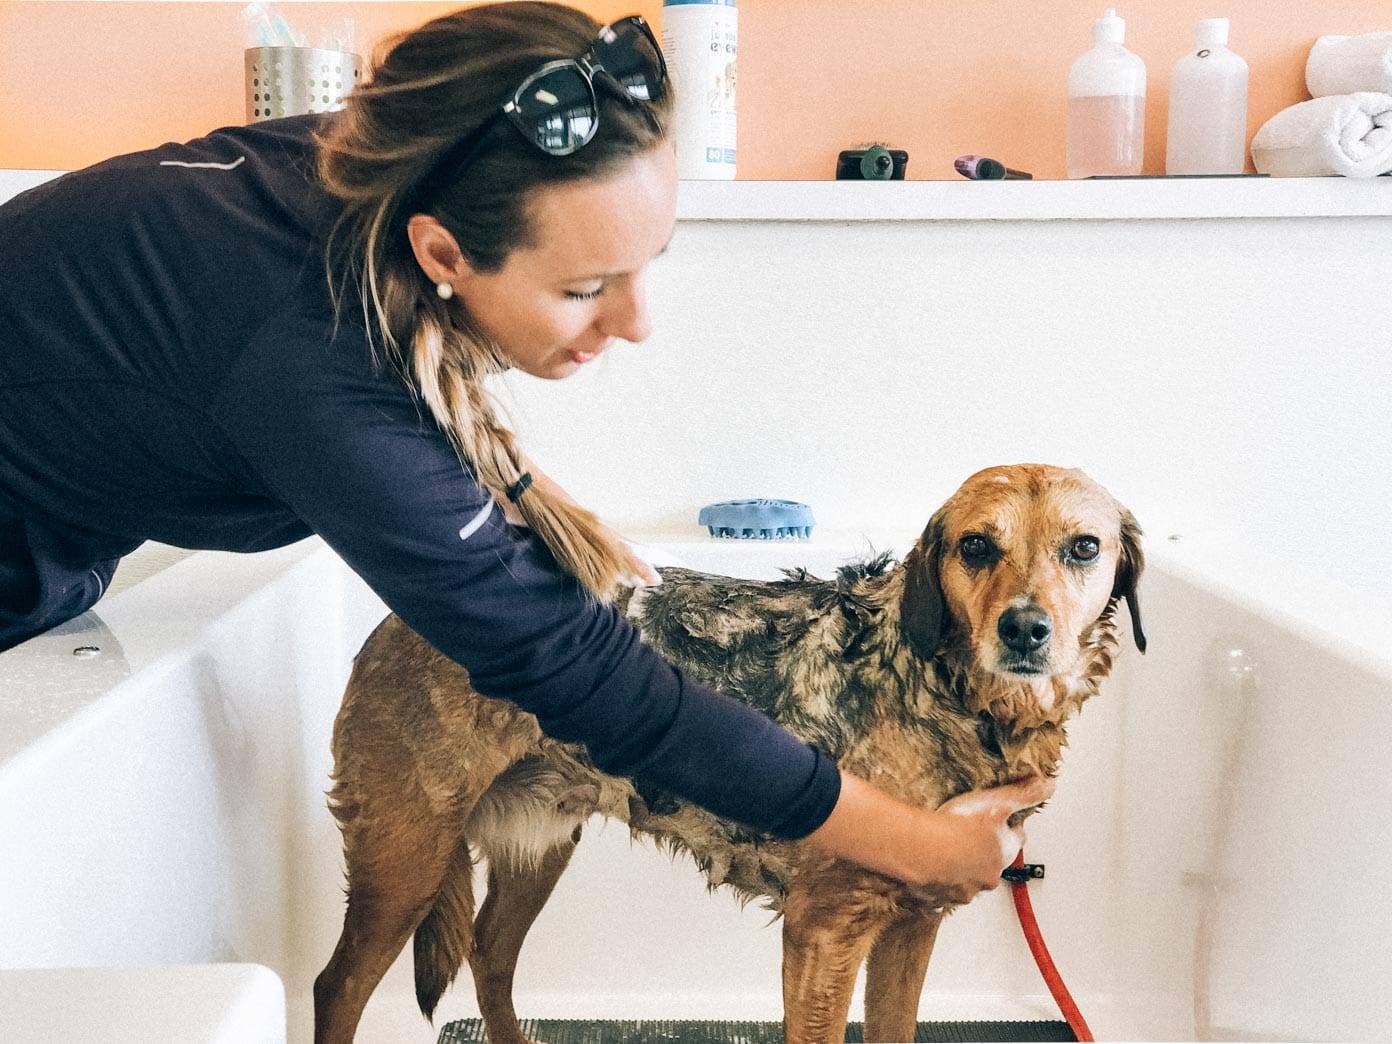 A woman washes a dog in a tub.